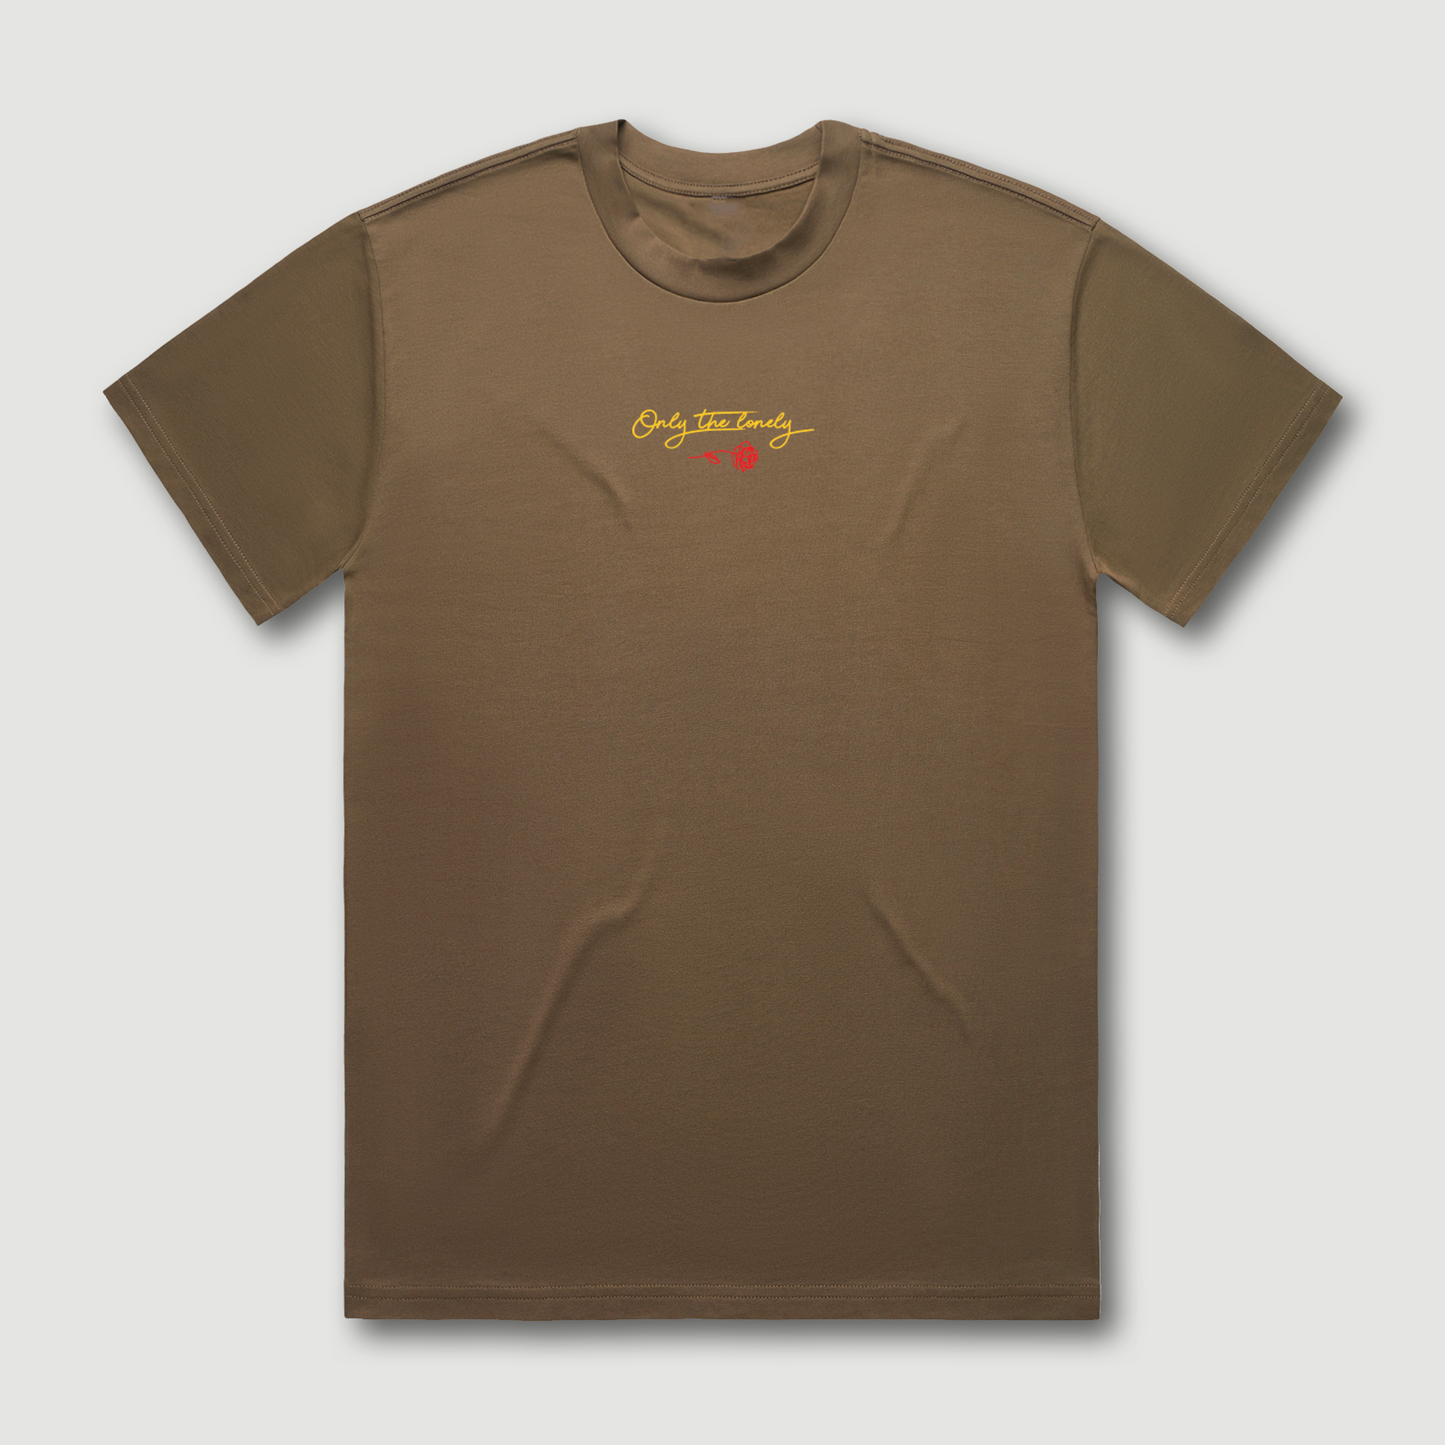 ONLY THE LONELY SCRIPT SHORT SLEEVE T-SHIRT (WALNUT)